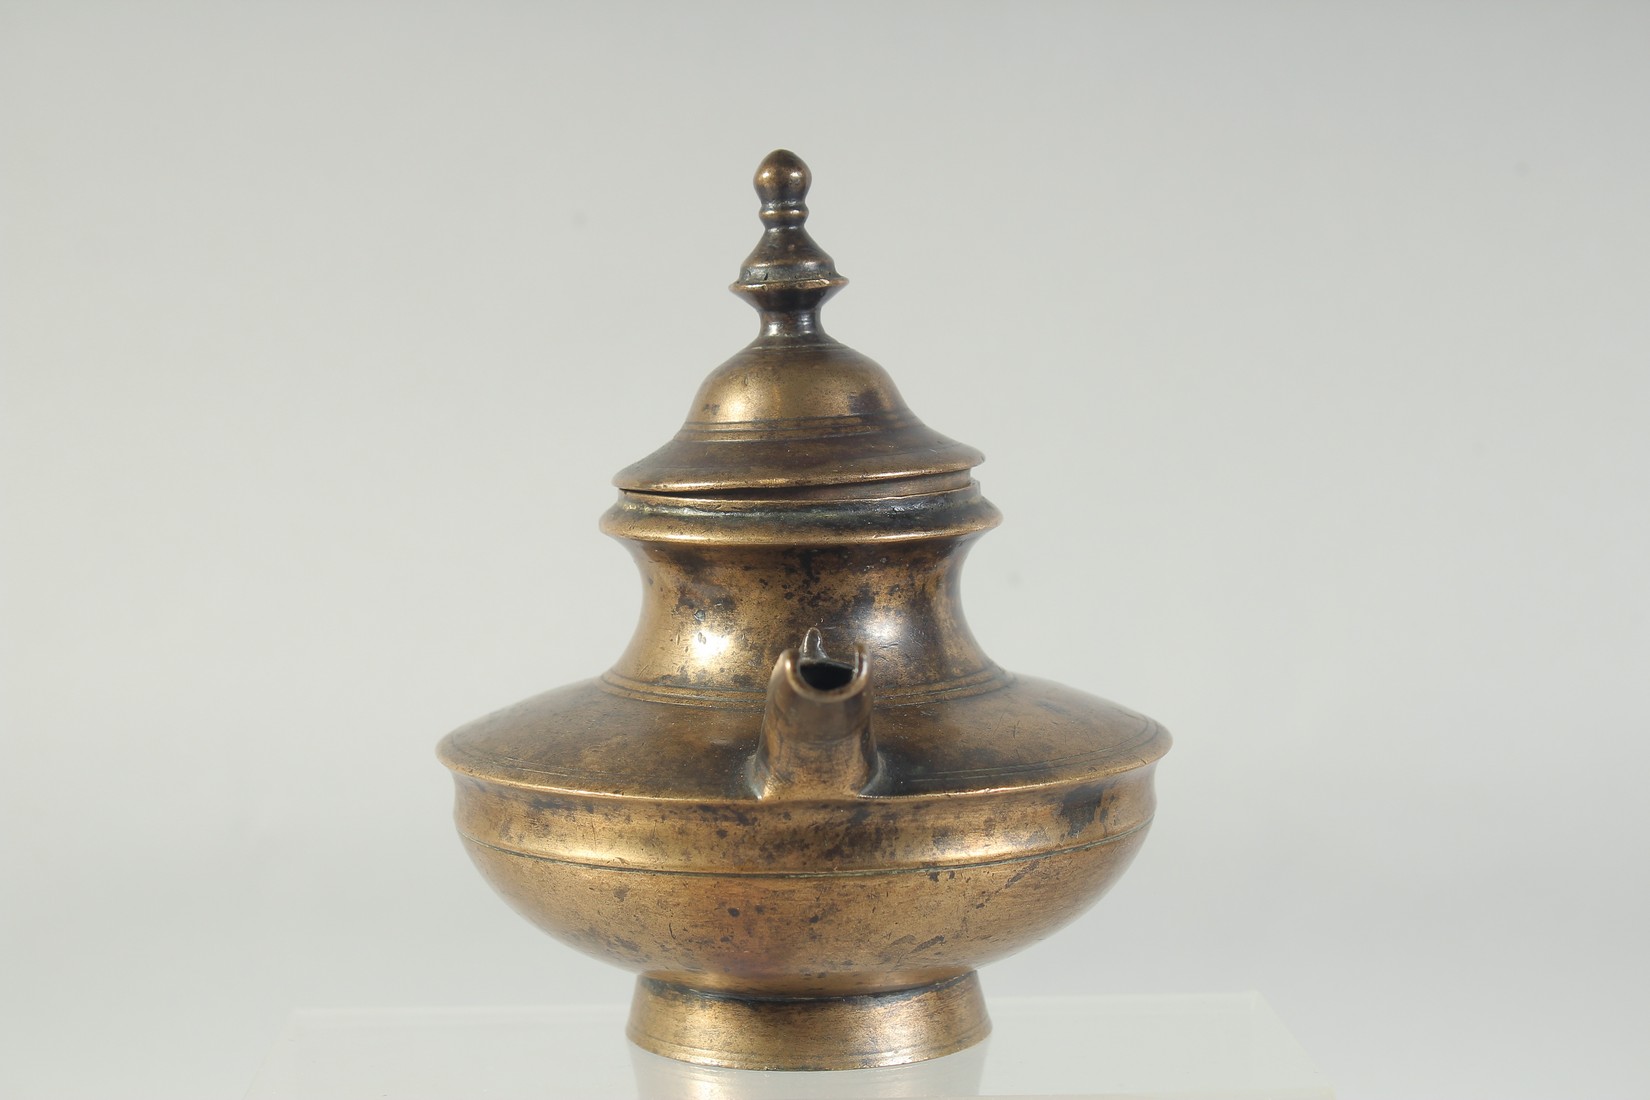 A 17TH-18TH CENTURY INDIAN BRASS SQUAT-FORM EWER, 17cm wide (including spout). - Image 2 of 6